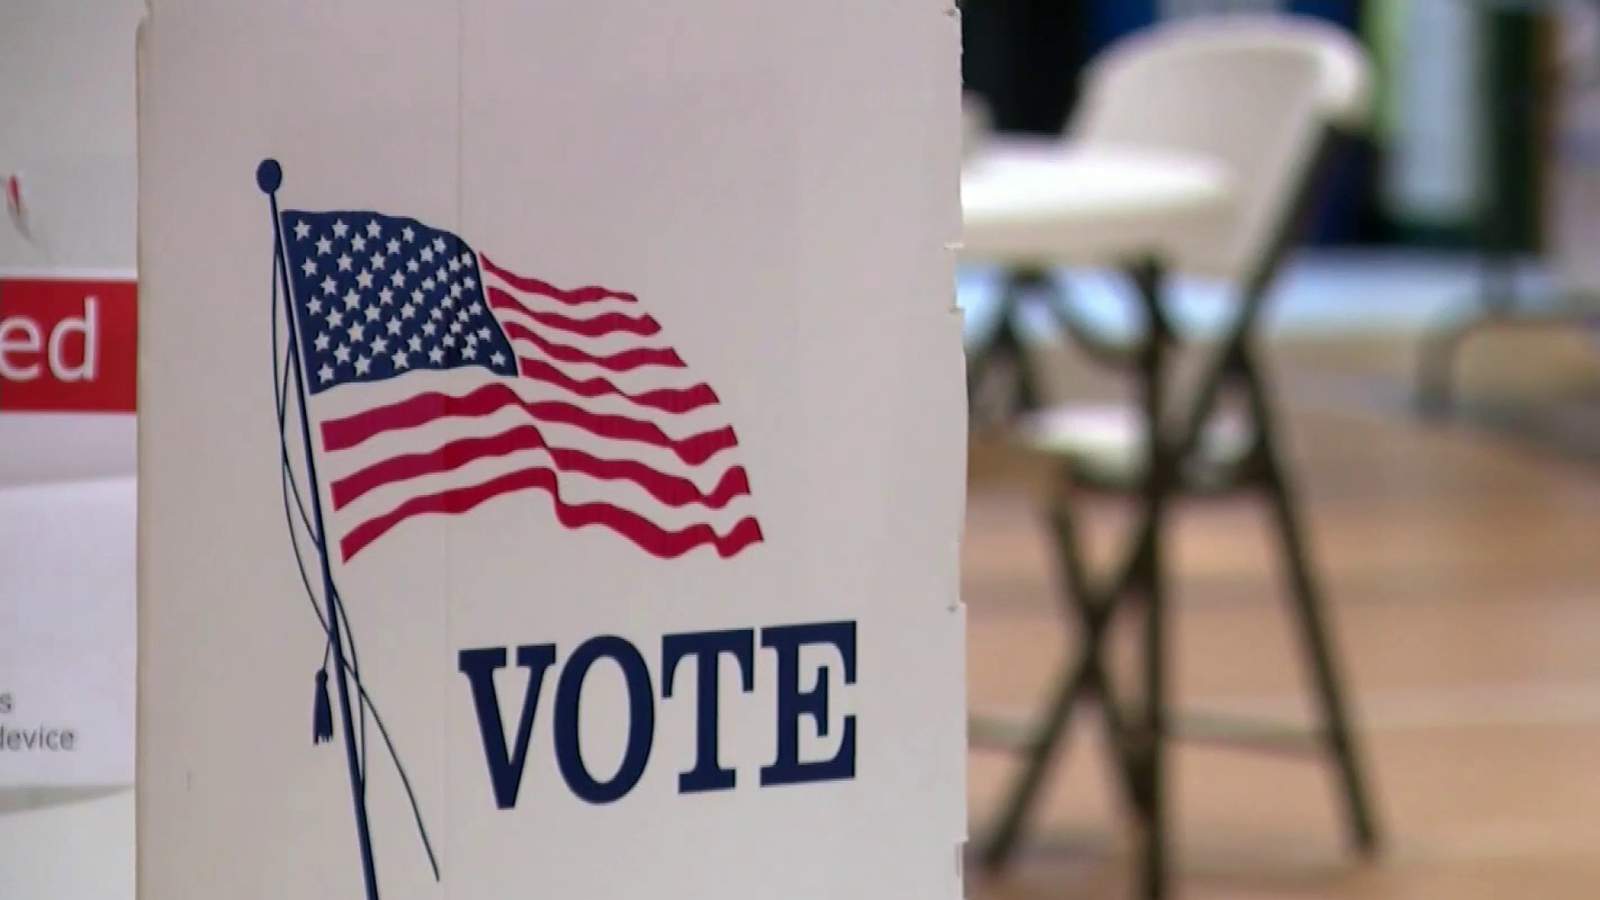 Nearly 900,000 Virginians have already cast their vote for president